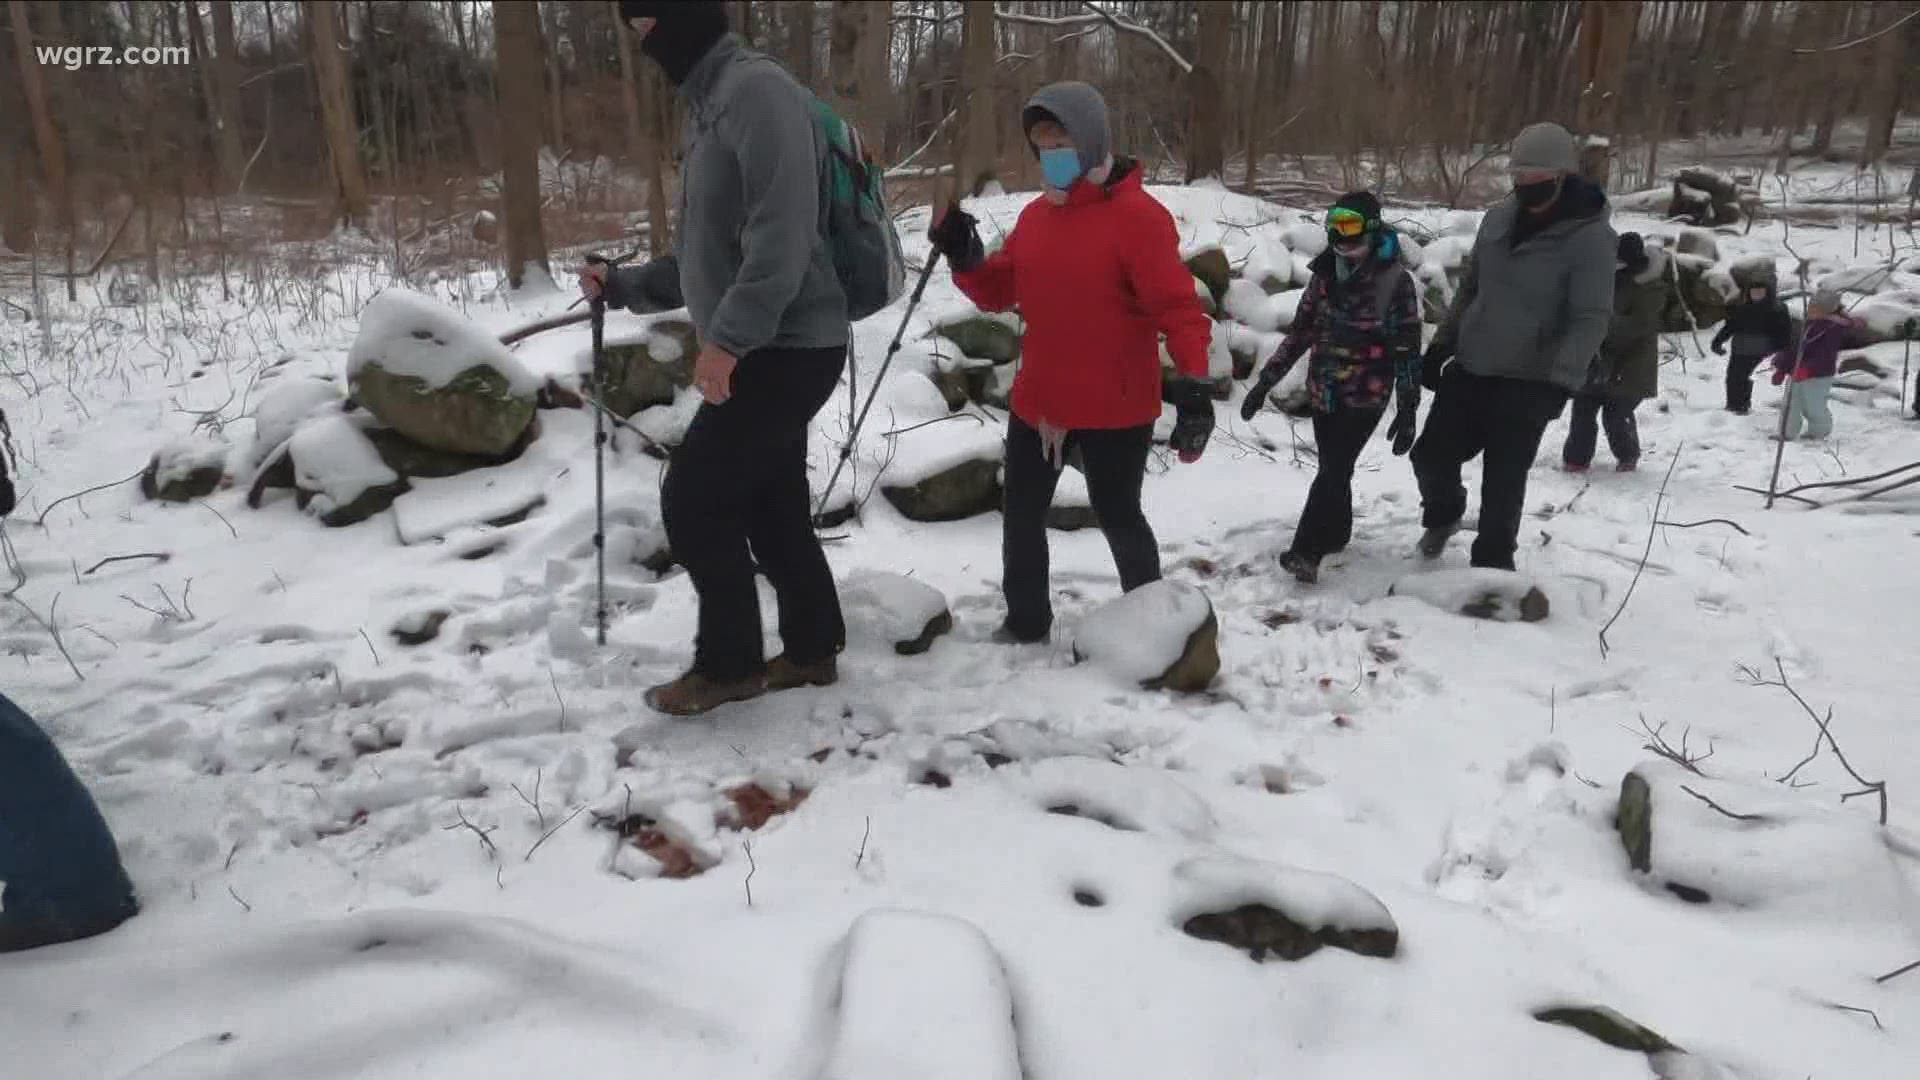 Despite the colder air, many Buffalonians are making an effort to get outside with the Western New York Winter Hiking Challenge.